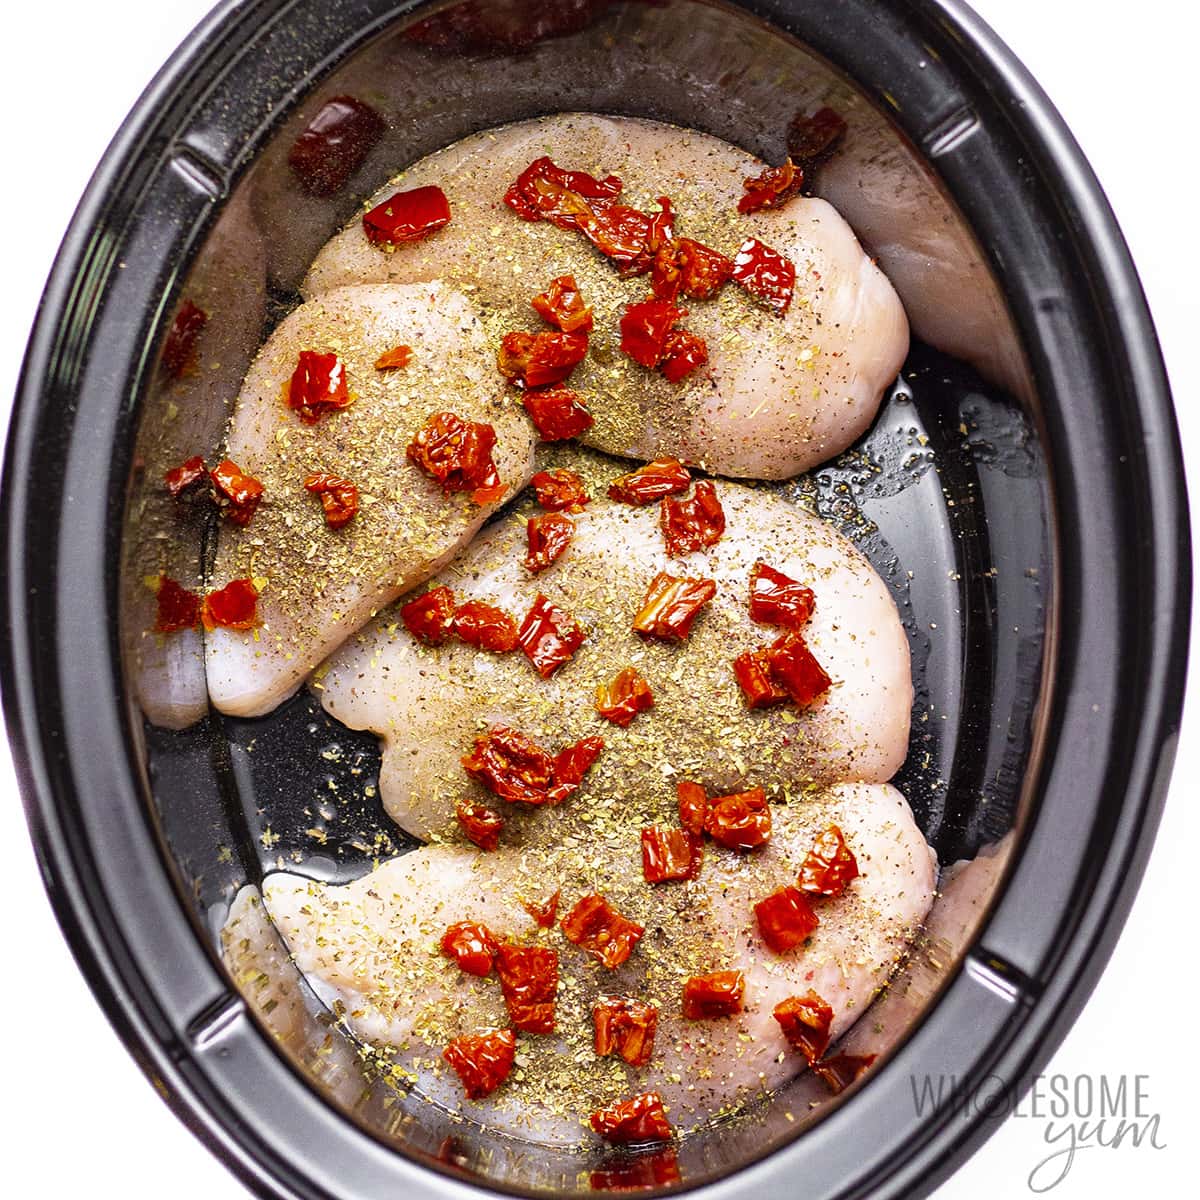 Seasoned chicken topped with sun dried tomatoes.